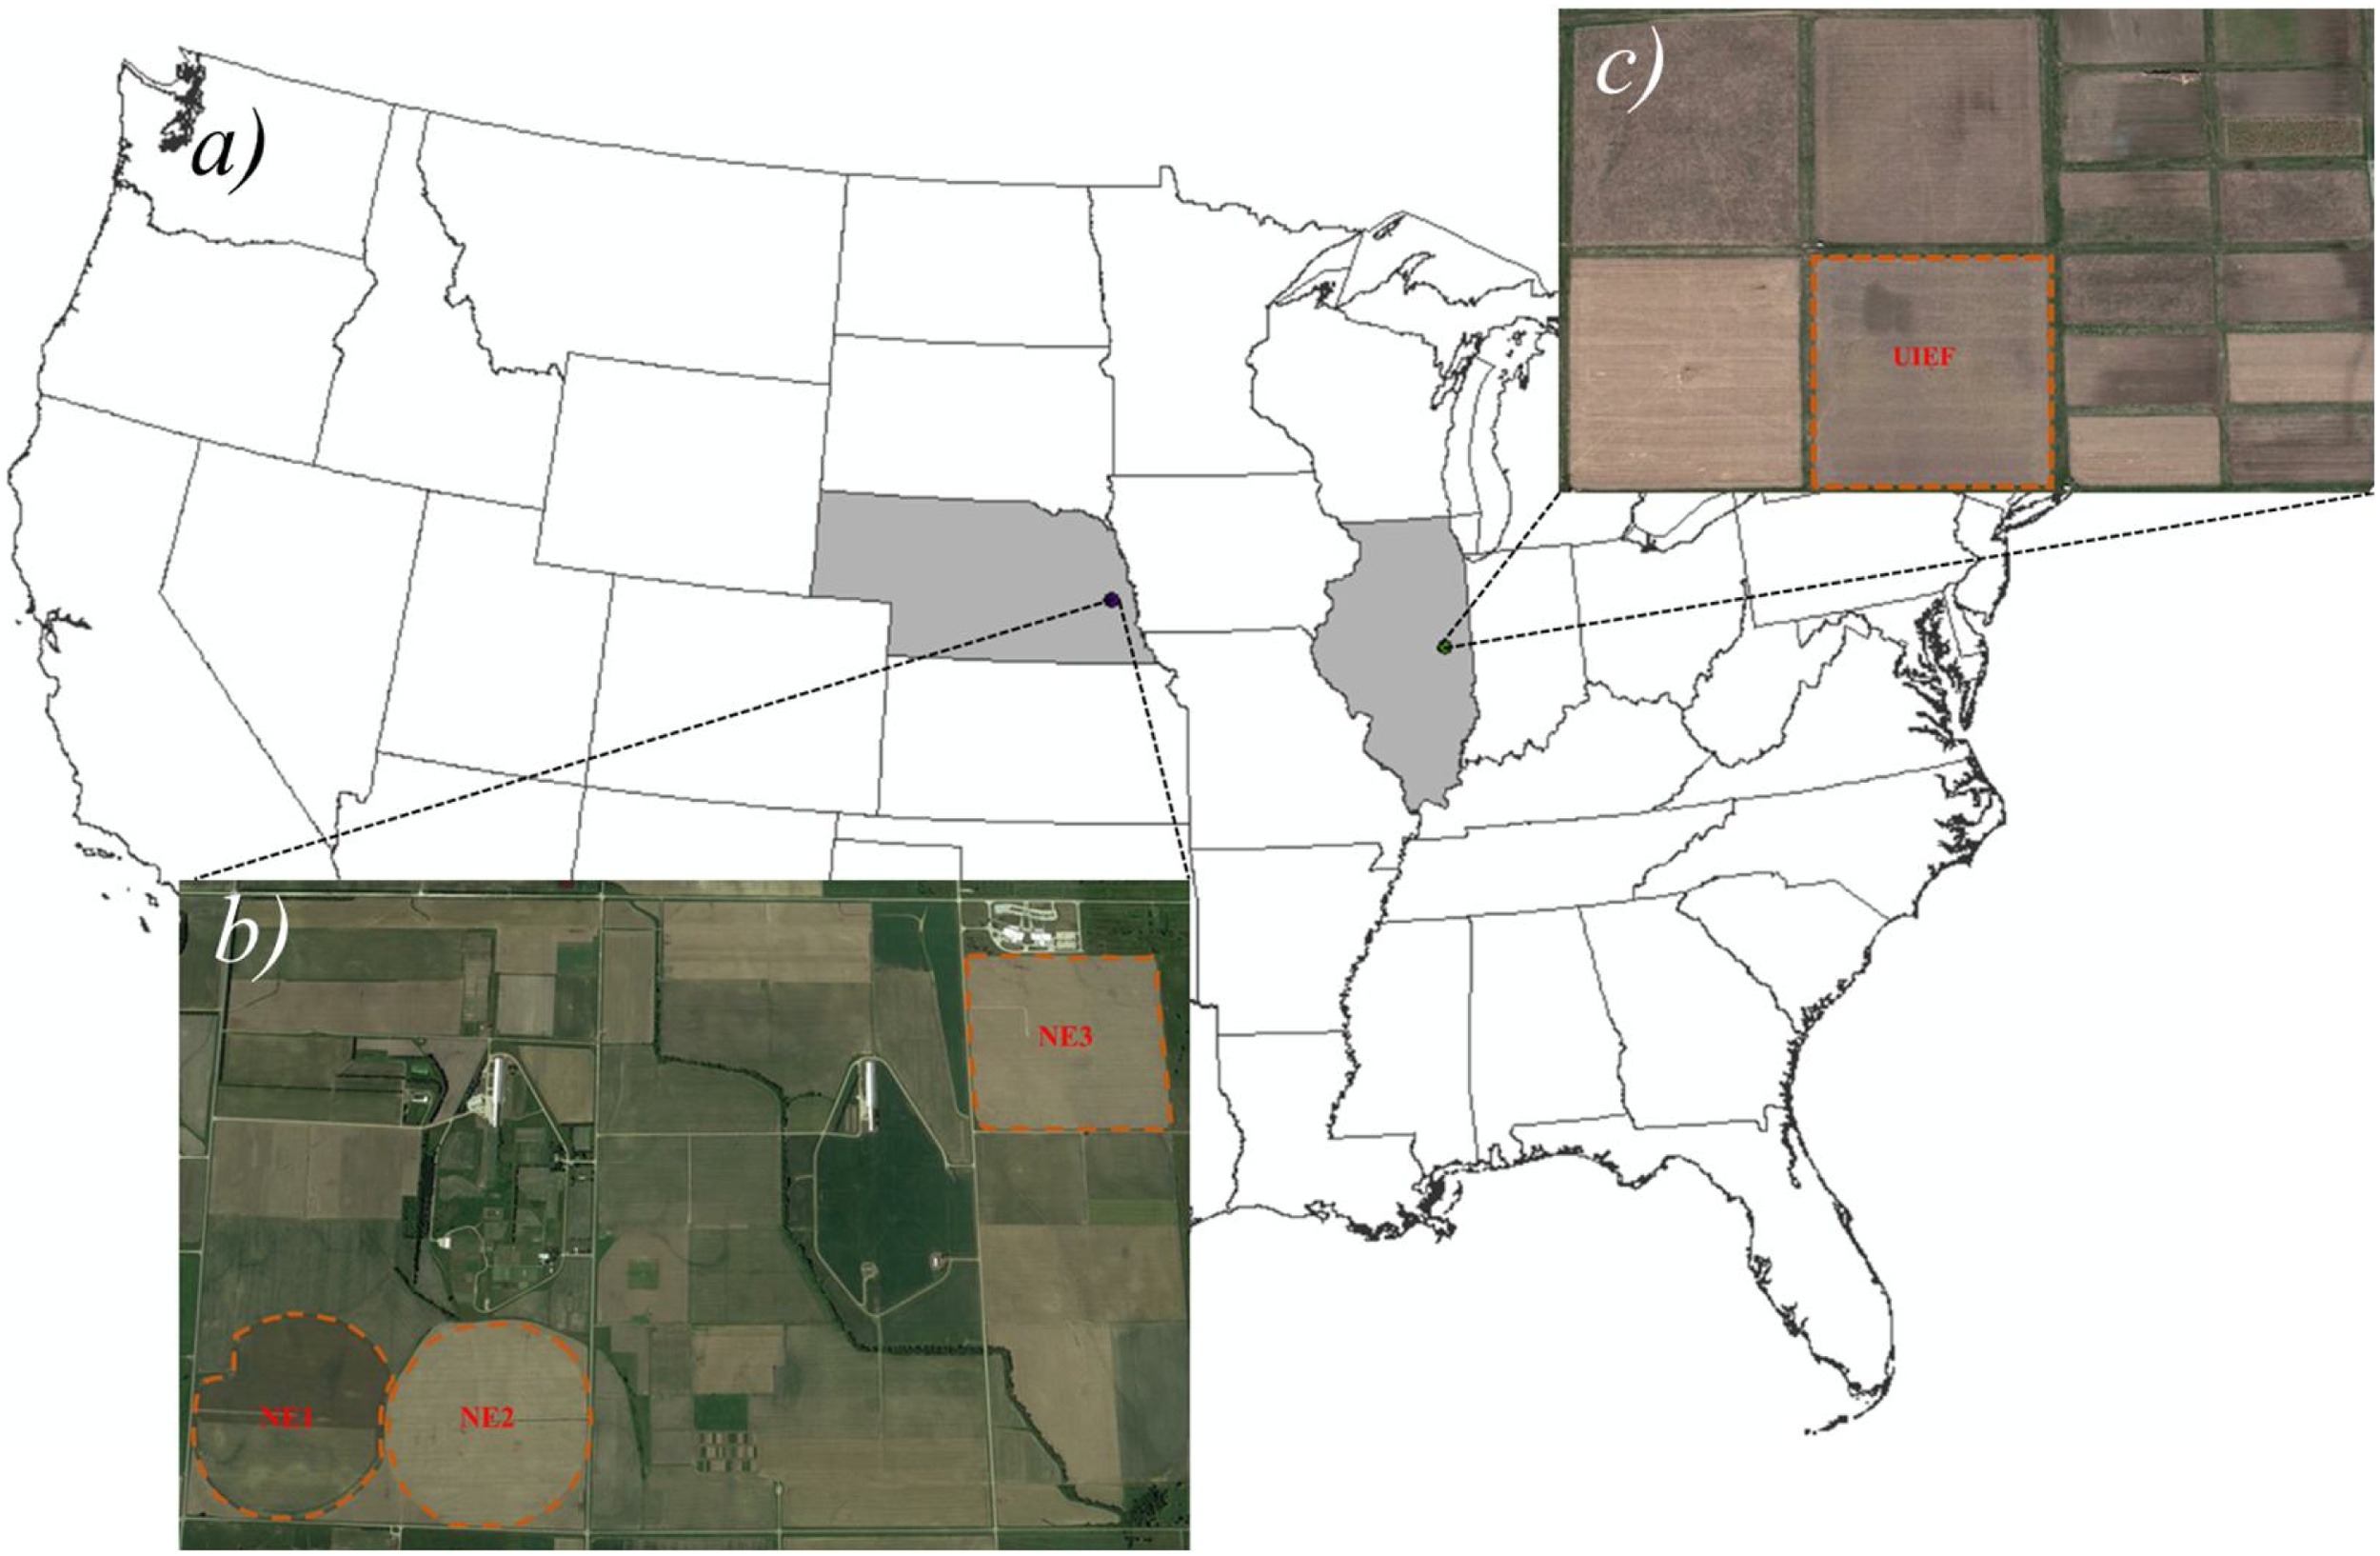 PhenoCrop: An integrated satellite-based framework to estimate physiological growth stages of corn and soybeans